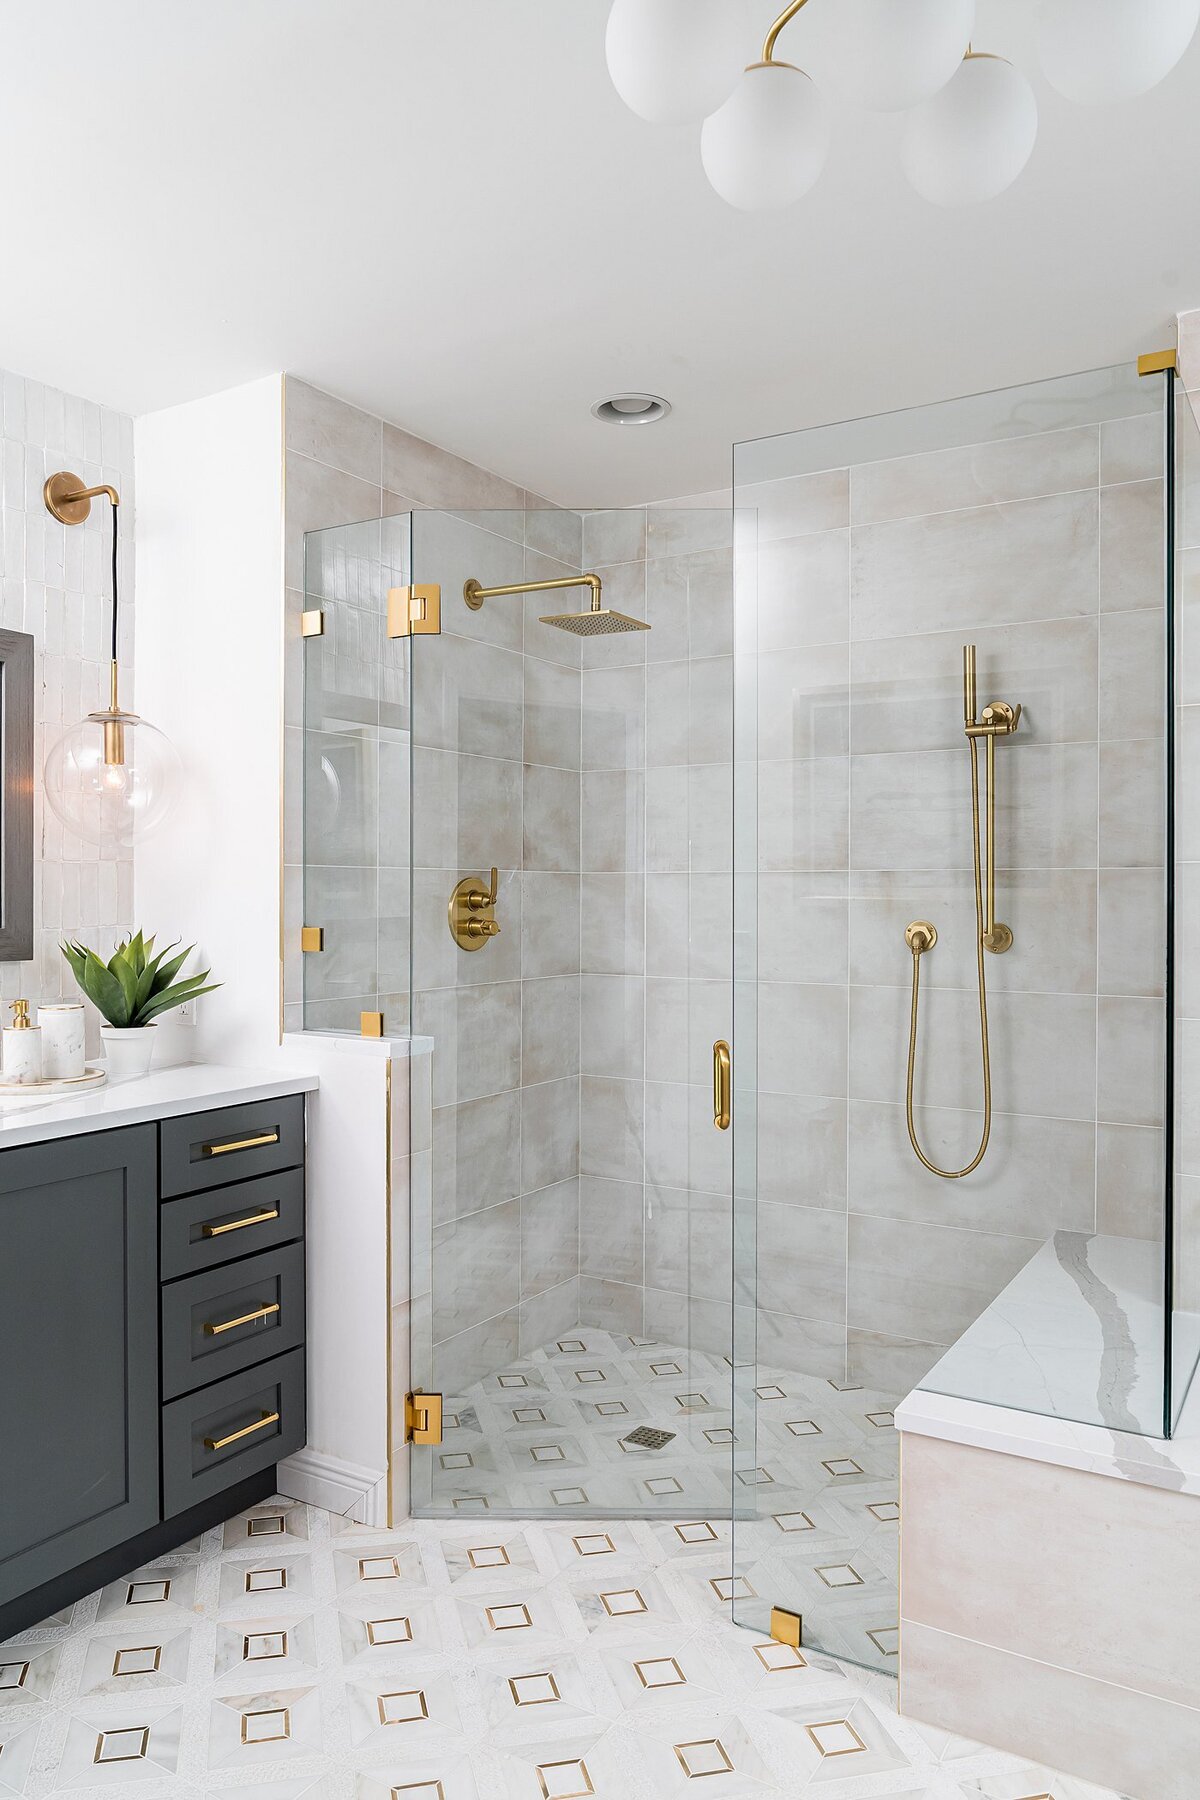 coastal luxury home Master Bathroom  modern glass enclosure shower with brass accents full service interior design by Island Home Interiors Lake Nona